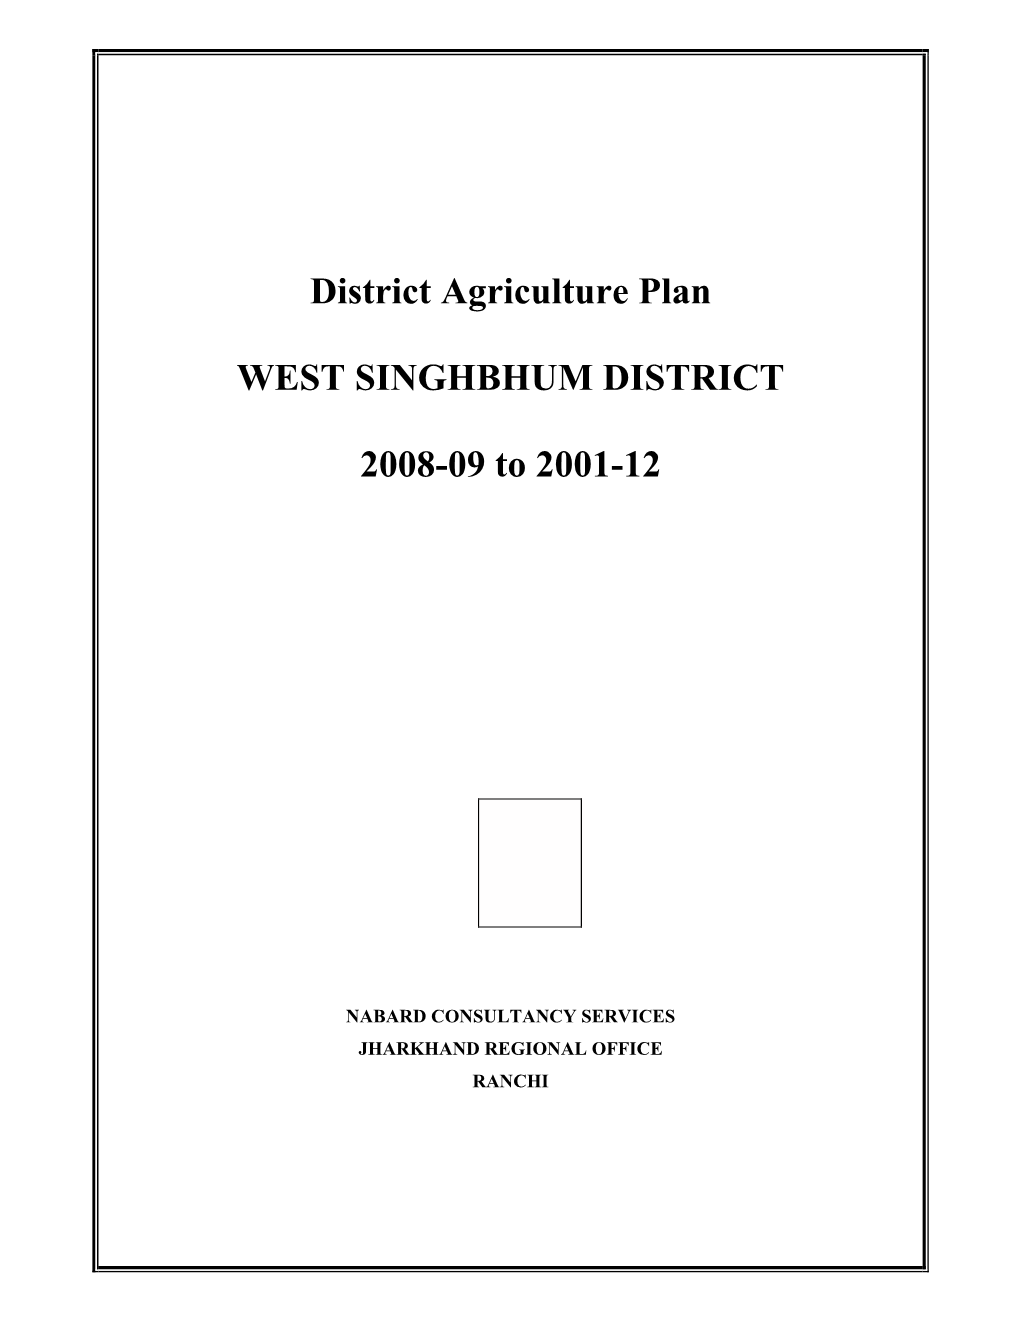 District Agriculture Plan WEST SINGHBHUM DISTRICT 2008-09 To